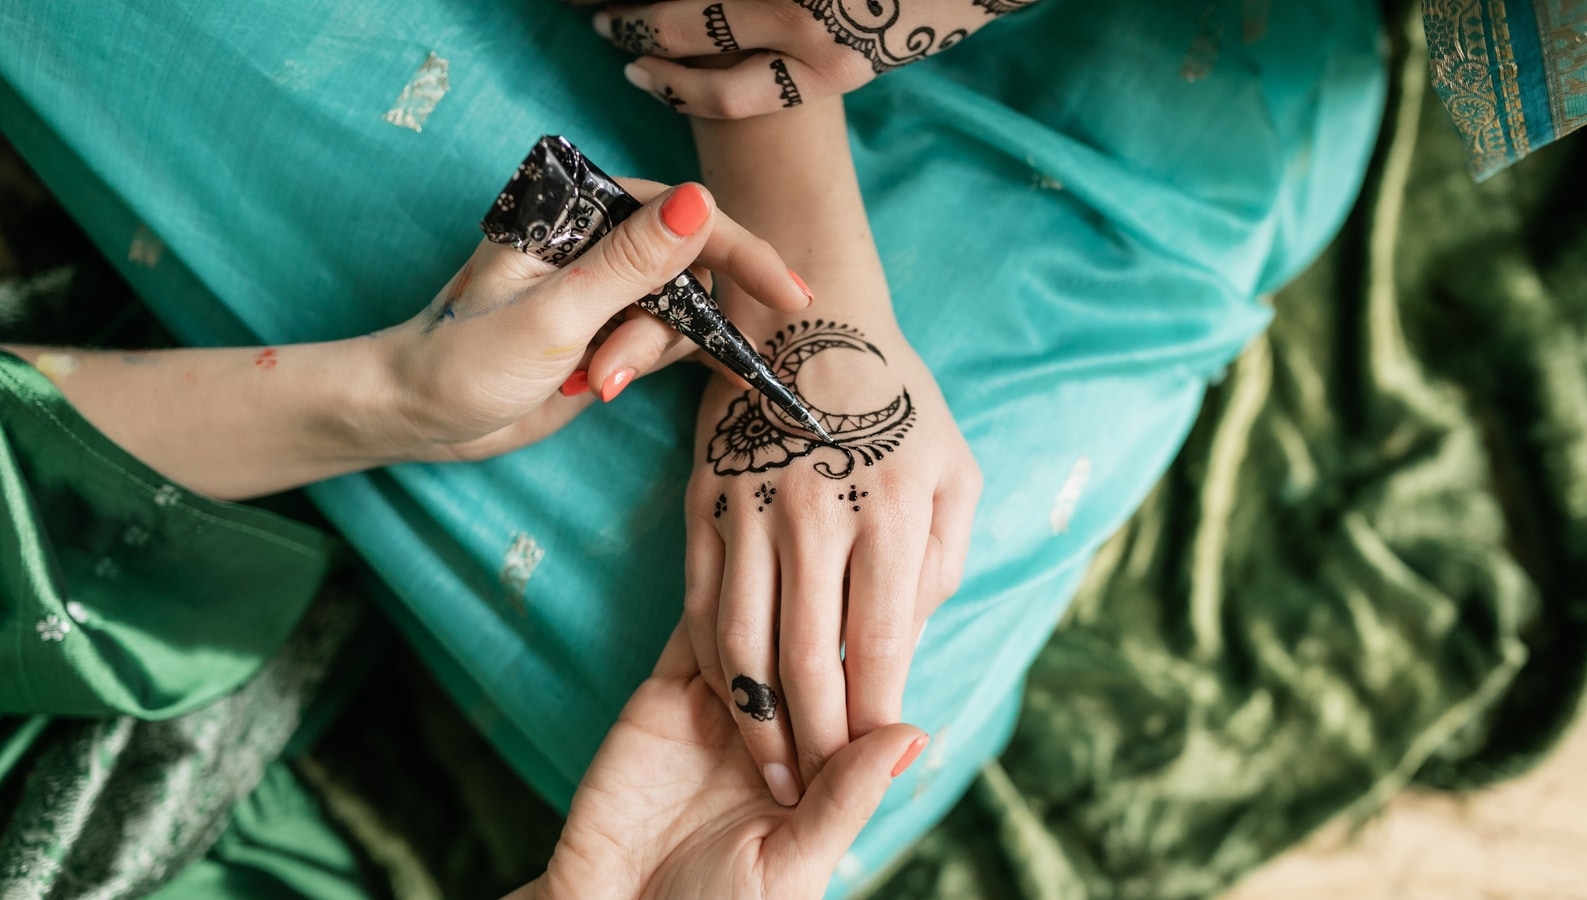 Woman with henna tattoo on hands sitting on bicycle stock photo